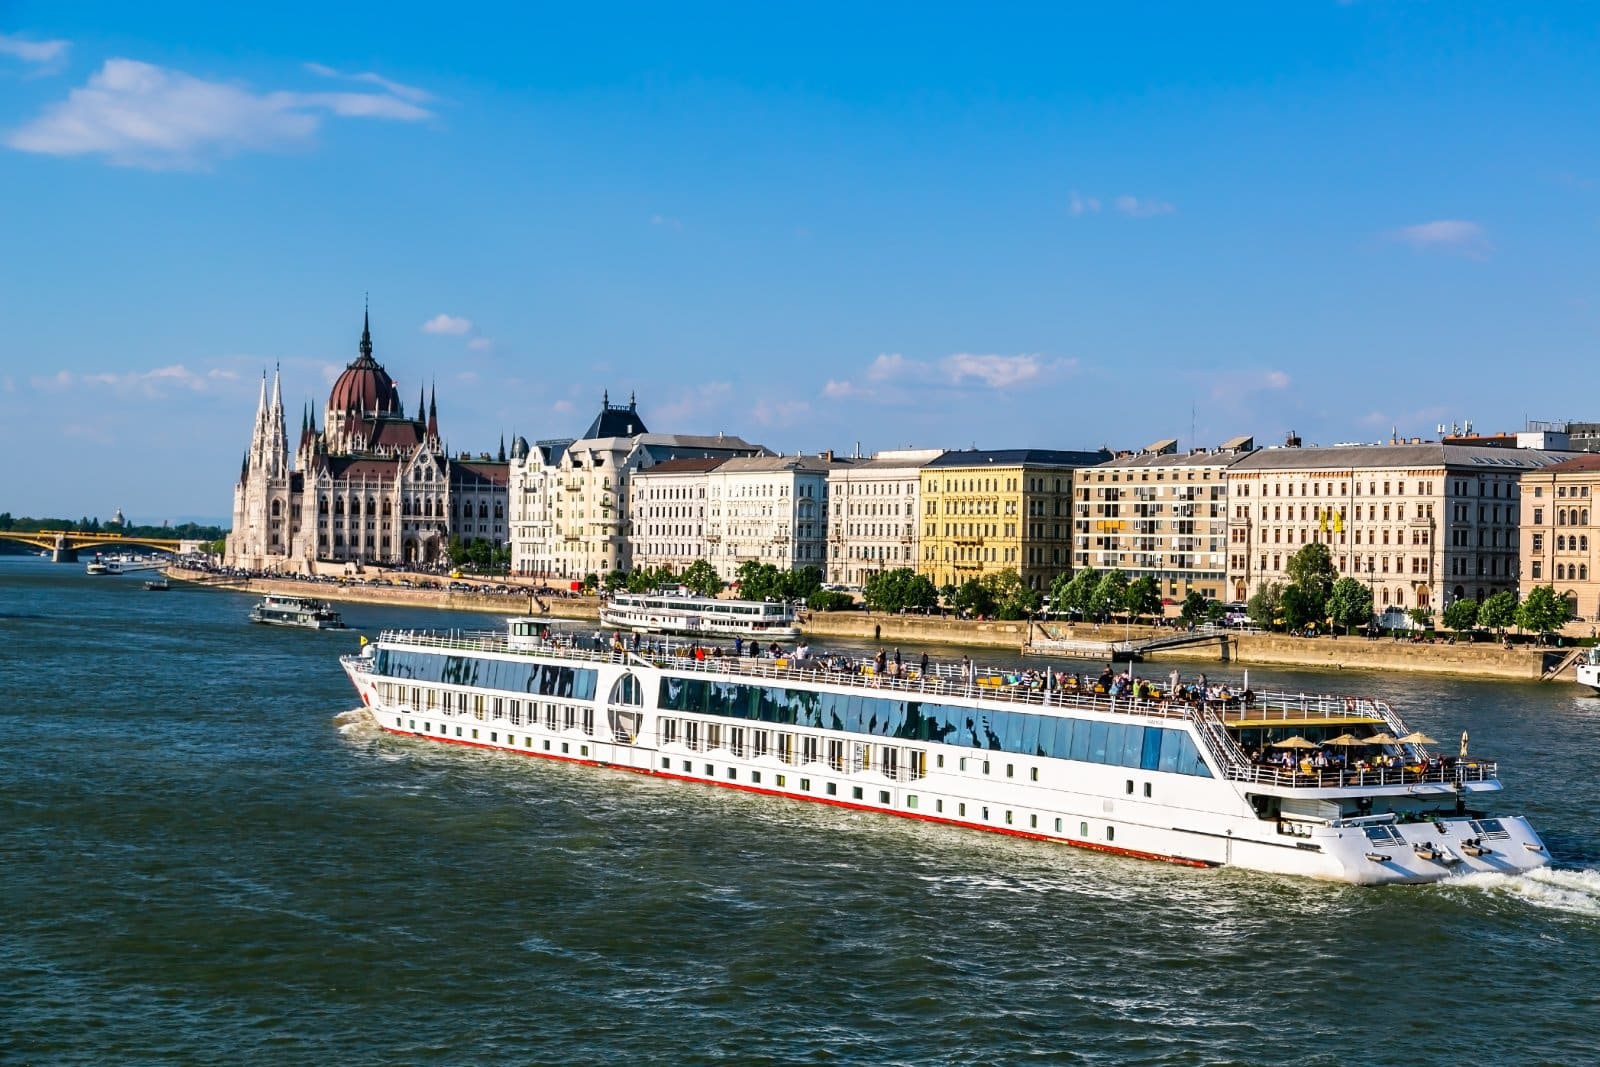 <p>Float along the Danube, stopping to explore historic European cities like Vienna, Budapest, and Bratislava.</p>